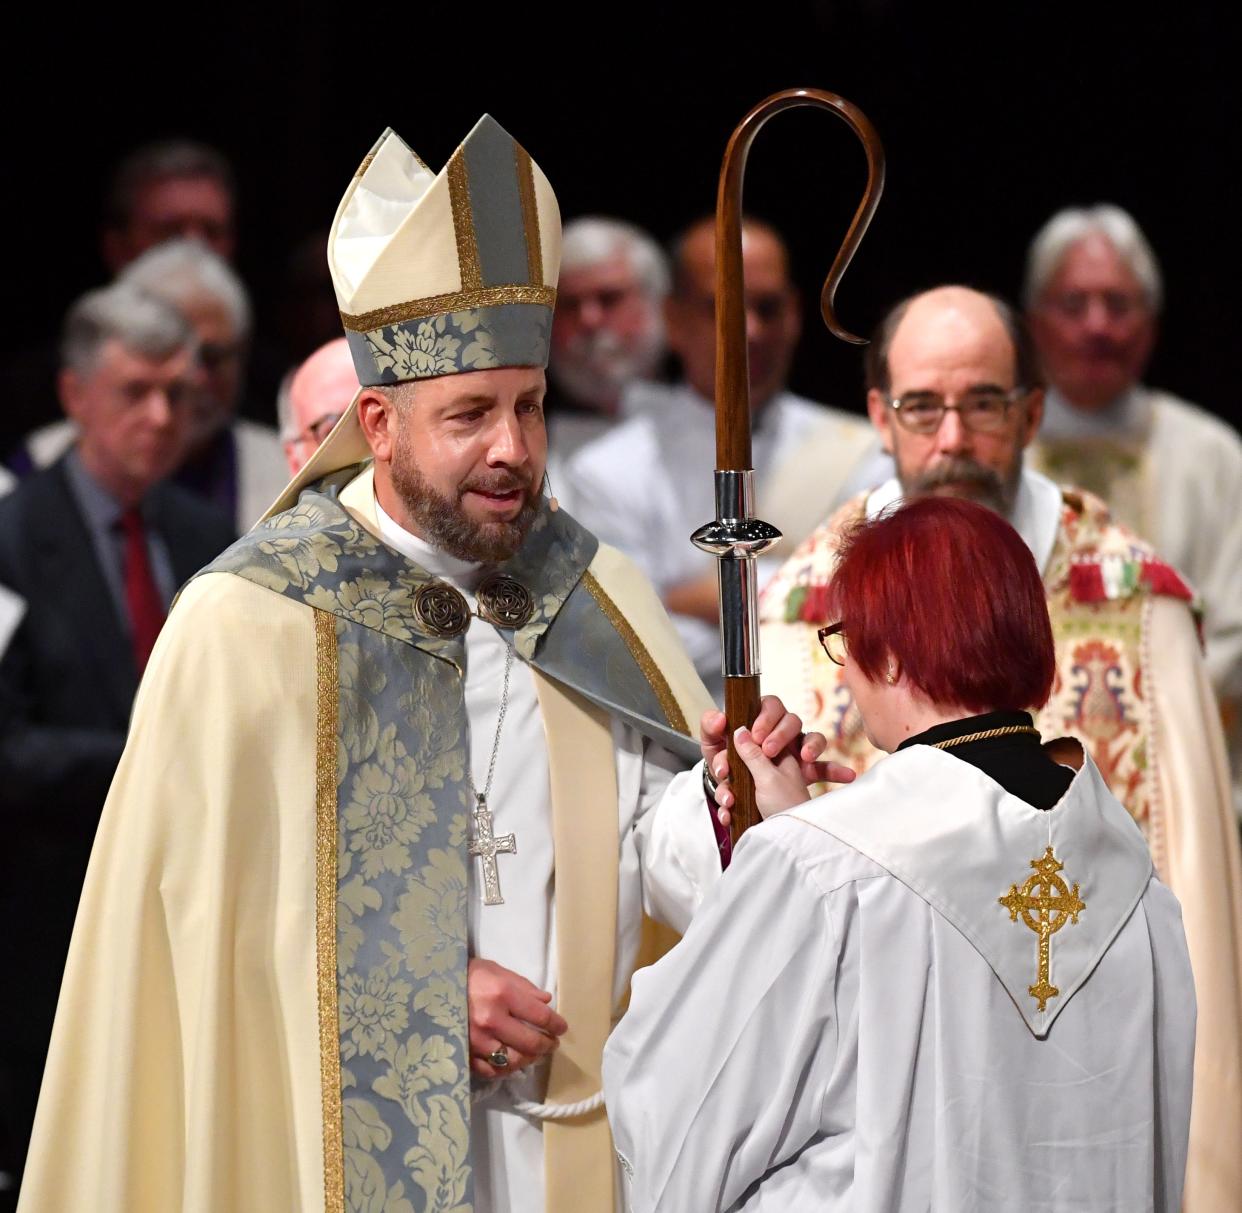 Newly ordained Bishop Rev. Dr. Douglas F. Scharf, wearing his new chasuble, Episcopal ring, and mitre, receives his crozier, a staff symbolizing his new role as chief shepherd.